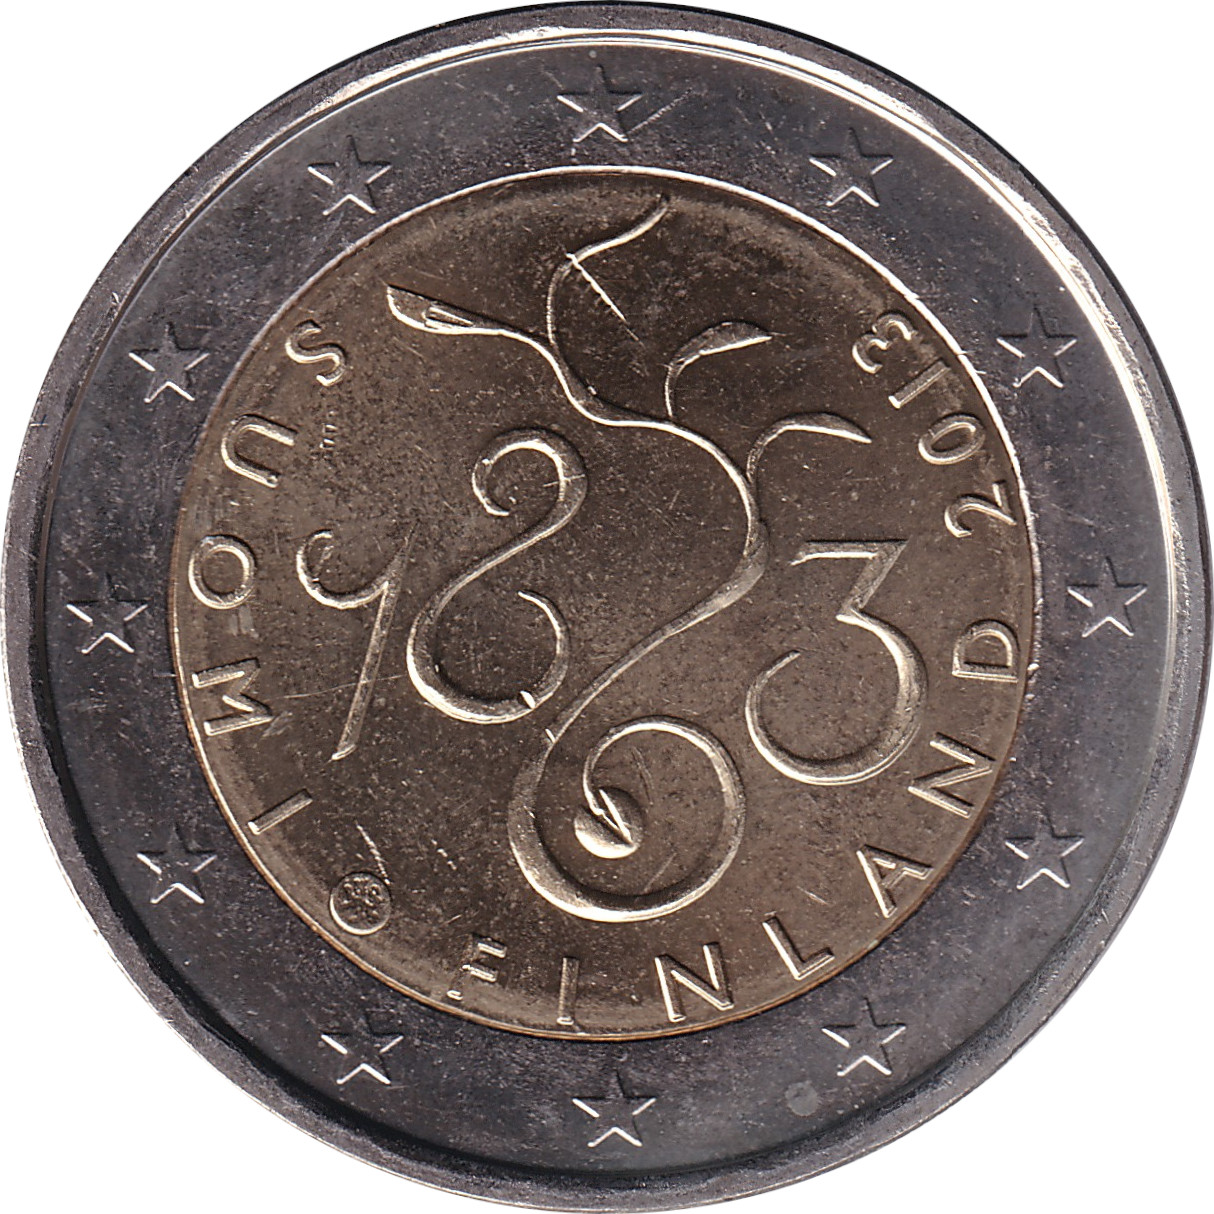 2 euro - Parlement - 150 years